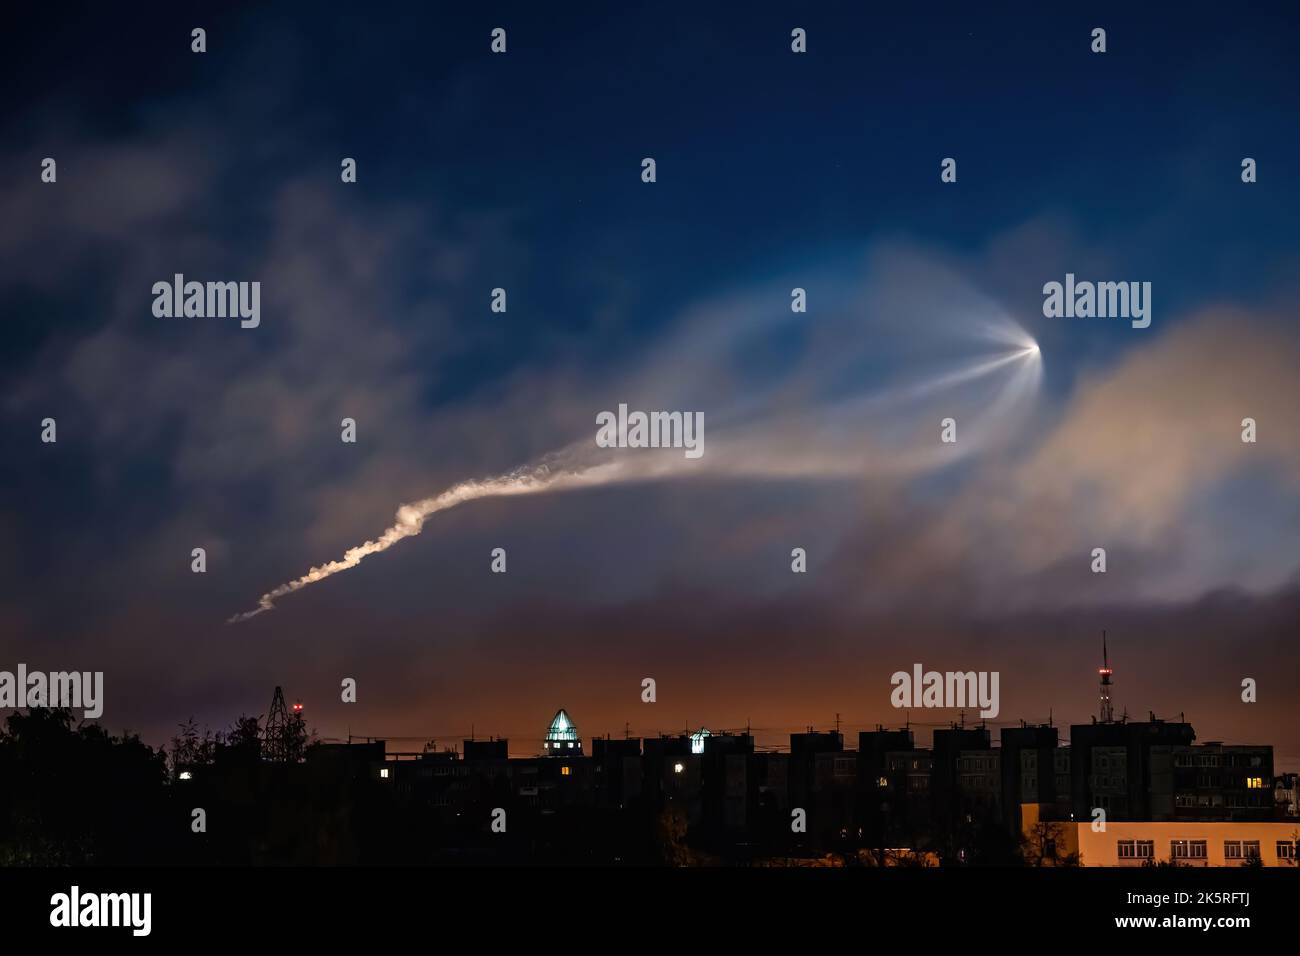 Soyuz space rocket launch. Space jellyfish in sky. Plume of rocket gases in sun at dawn. Jet trail from space rocket. Astronomical phenomenon over cit Stock Photo